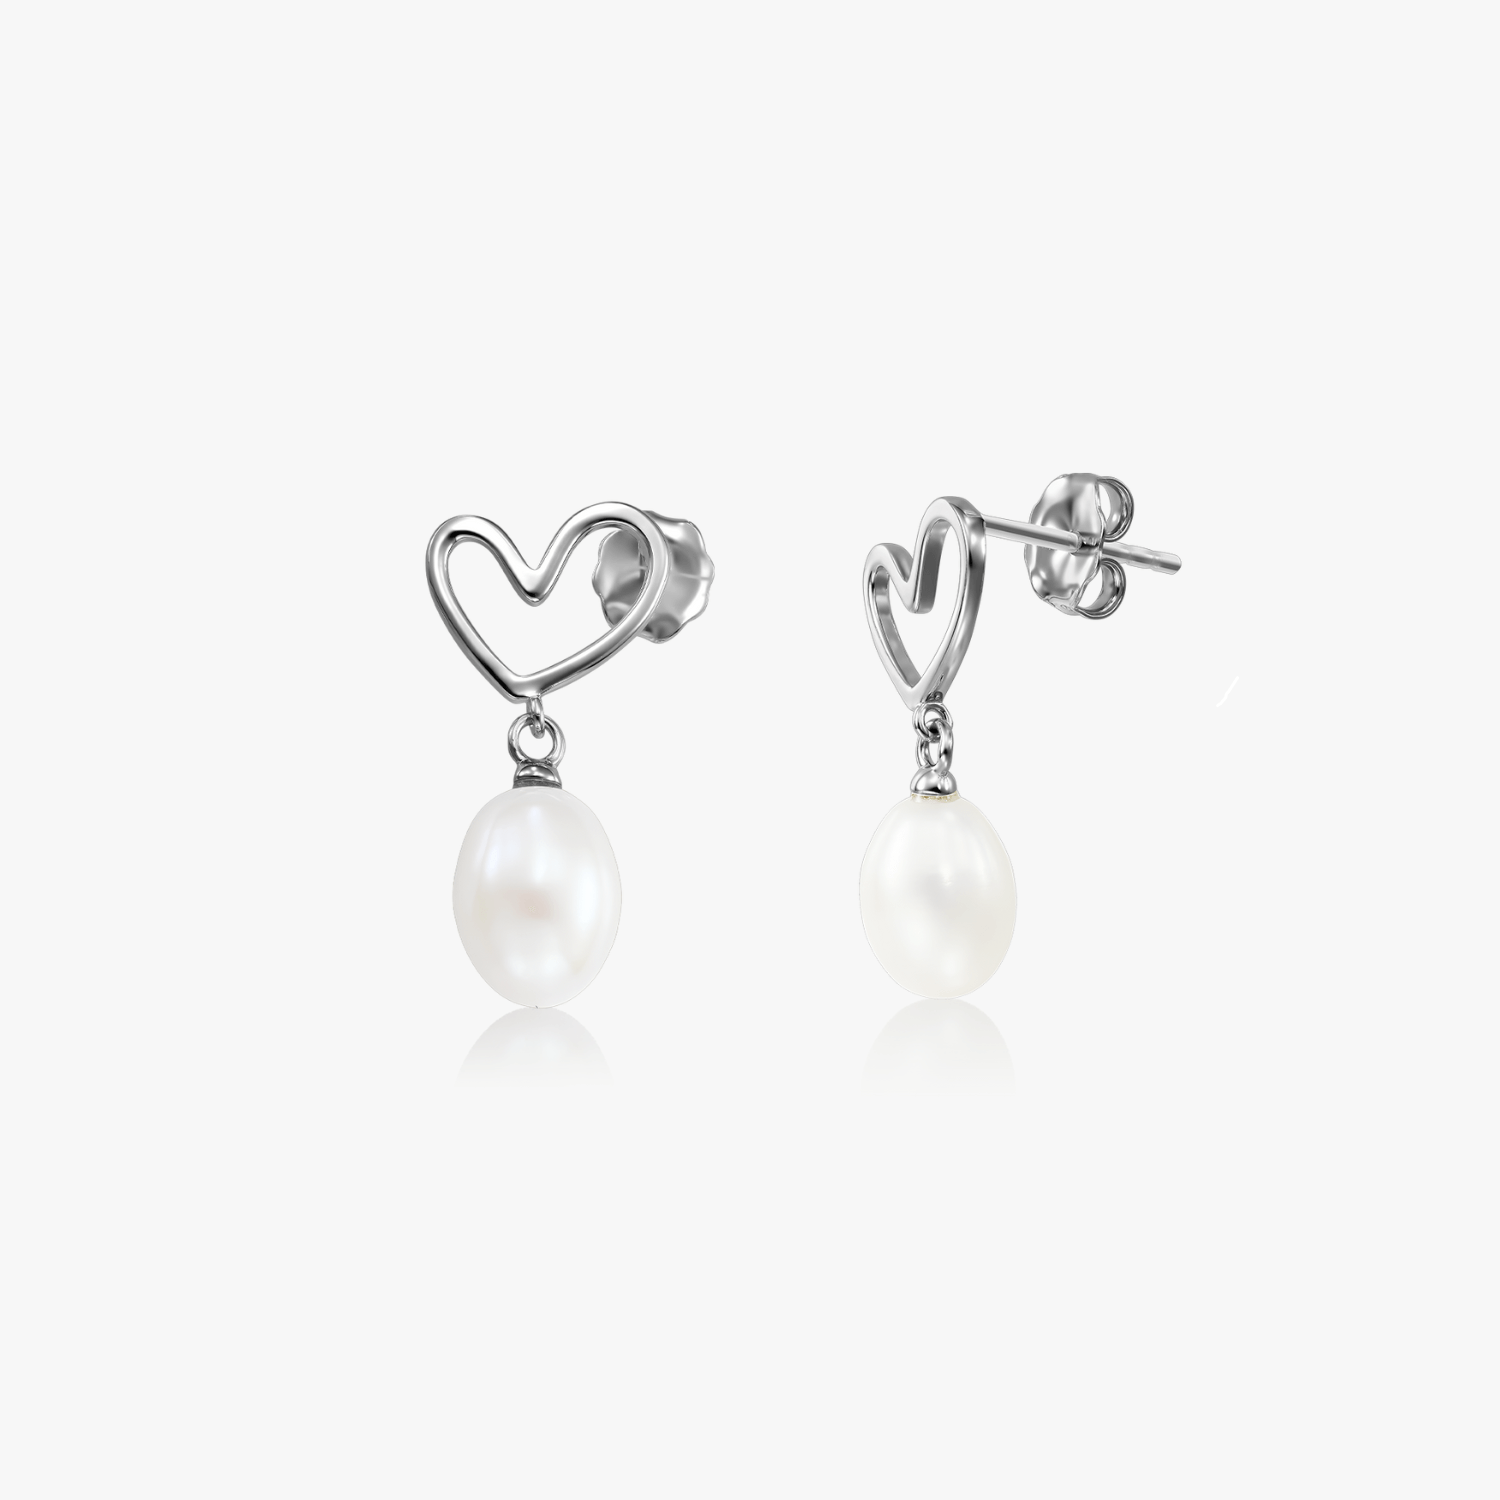 Lydia silver earrings - Natural pearls